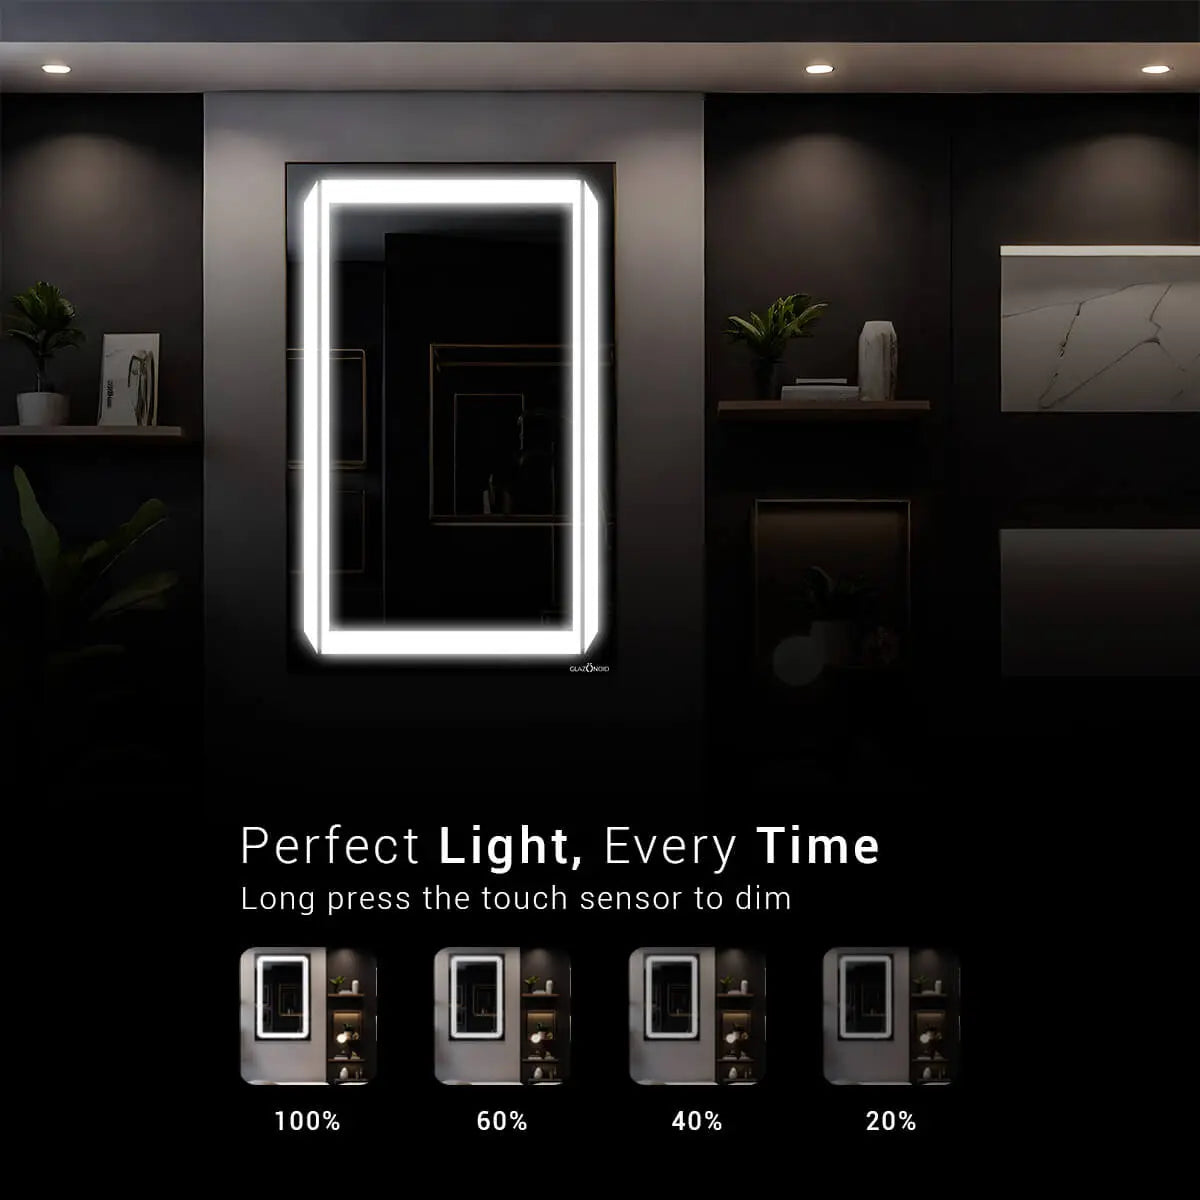 Modern bathroom LED mirror with a touch sensor and a built-in dimmable LED light with adjustable brightness levels. Text overlay says "Perfect Light, Every Time. Long press the touch sensor to dim the LED light for a customized experience." This versatile mirror provides bright light for tasks and a dimmer setting for a more relaxing ambiance.